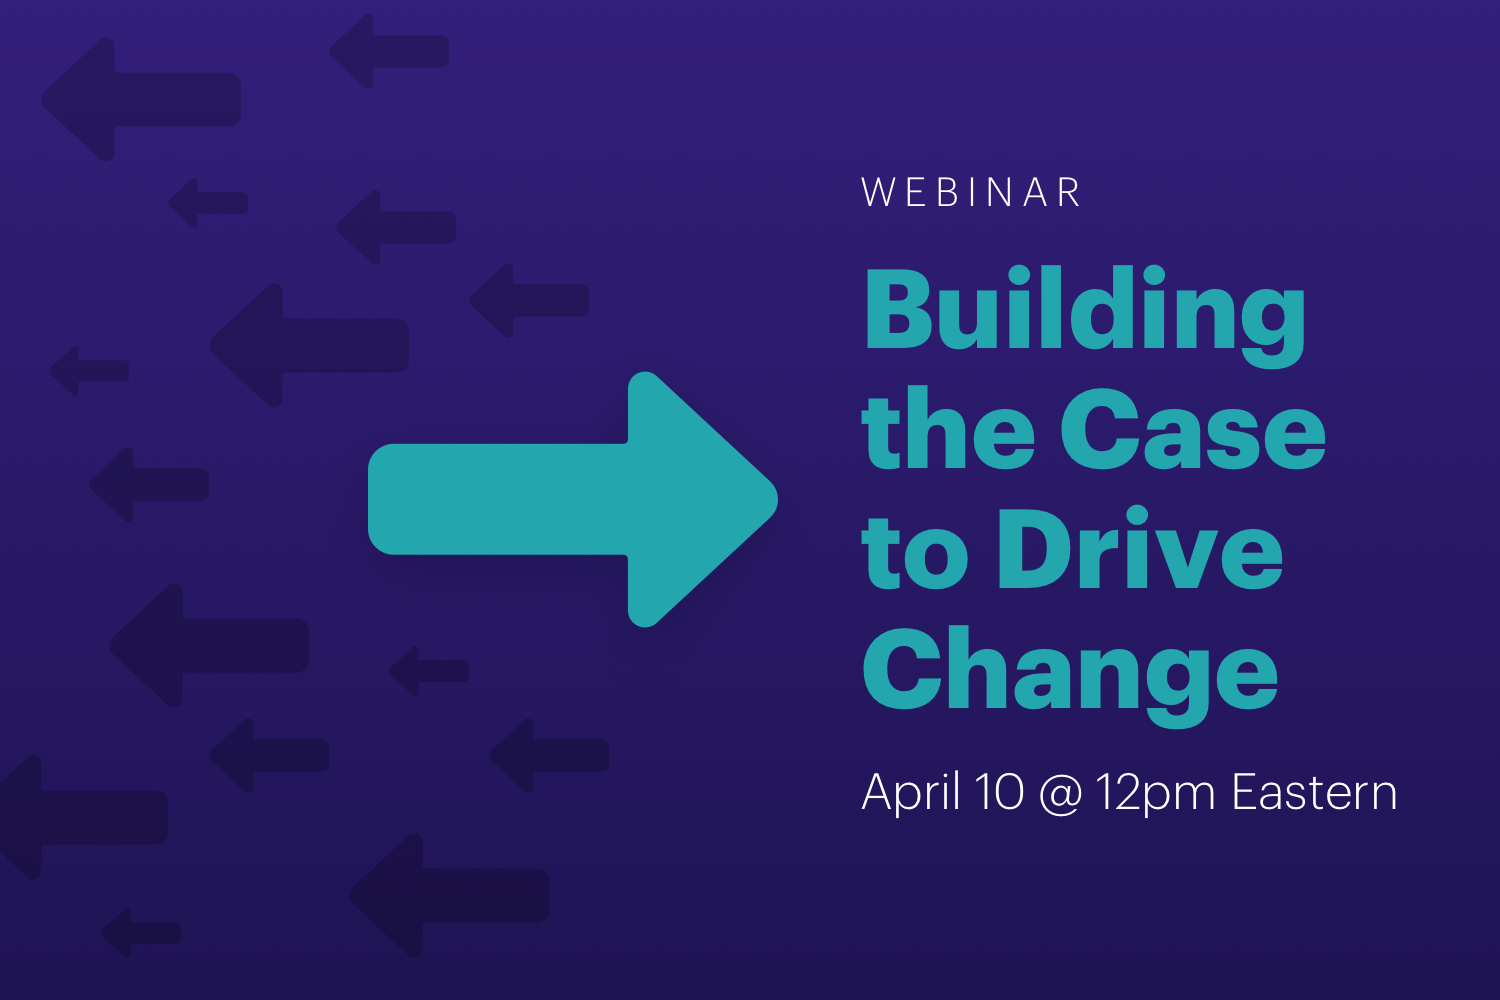 Webinar: Building the Case to Drive Change